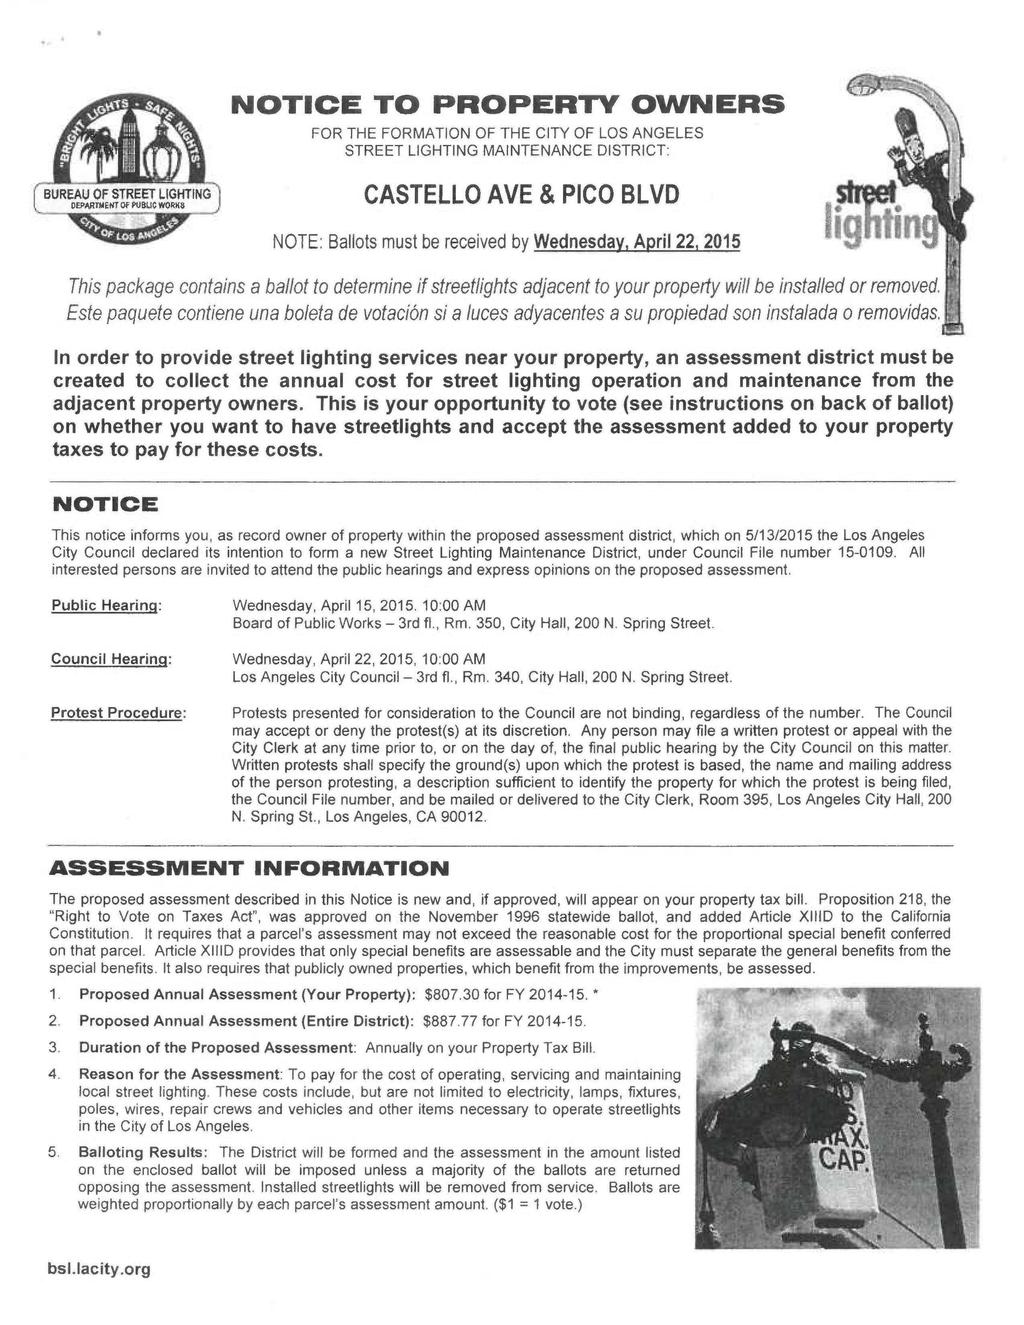 NOTICE TO PROPERTY OWNERS FOR THE FORMATION OF THE CITY OF LOS ANGELES STREET LIGHTING MAINTENANCE DISTRICT: CASTELLO AVE & PICO BLVD NOTE: Ballots must be received by Wednesday, April22, 2015 This